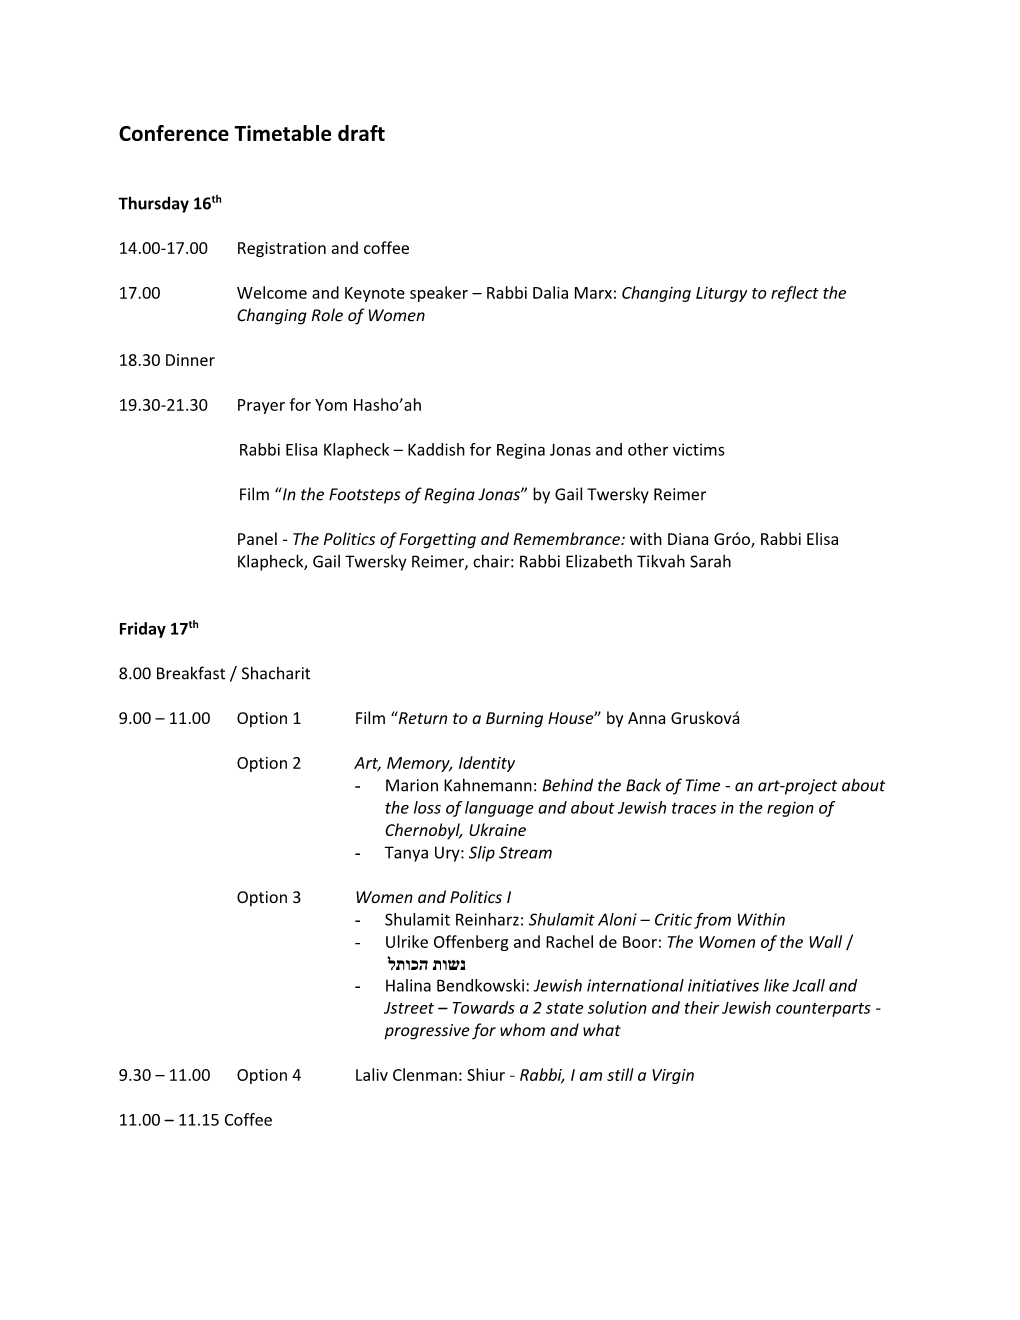 Conference Timetable Draft